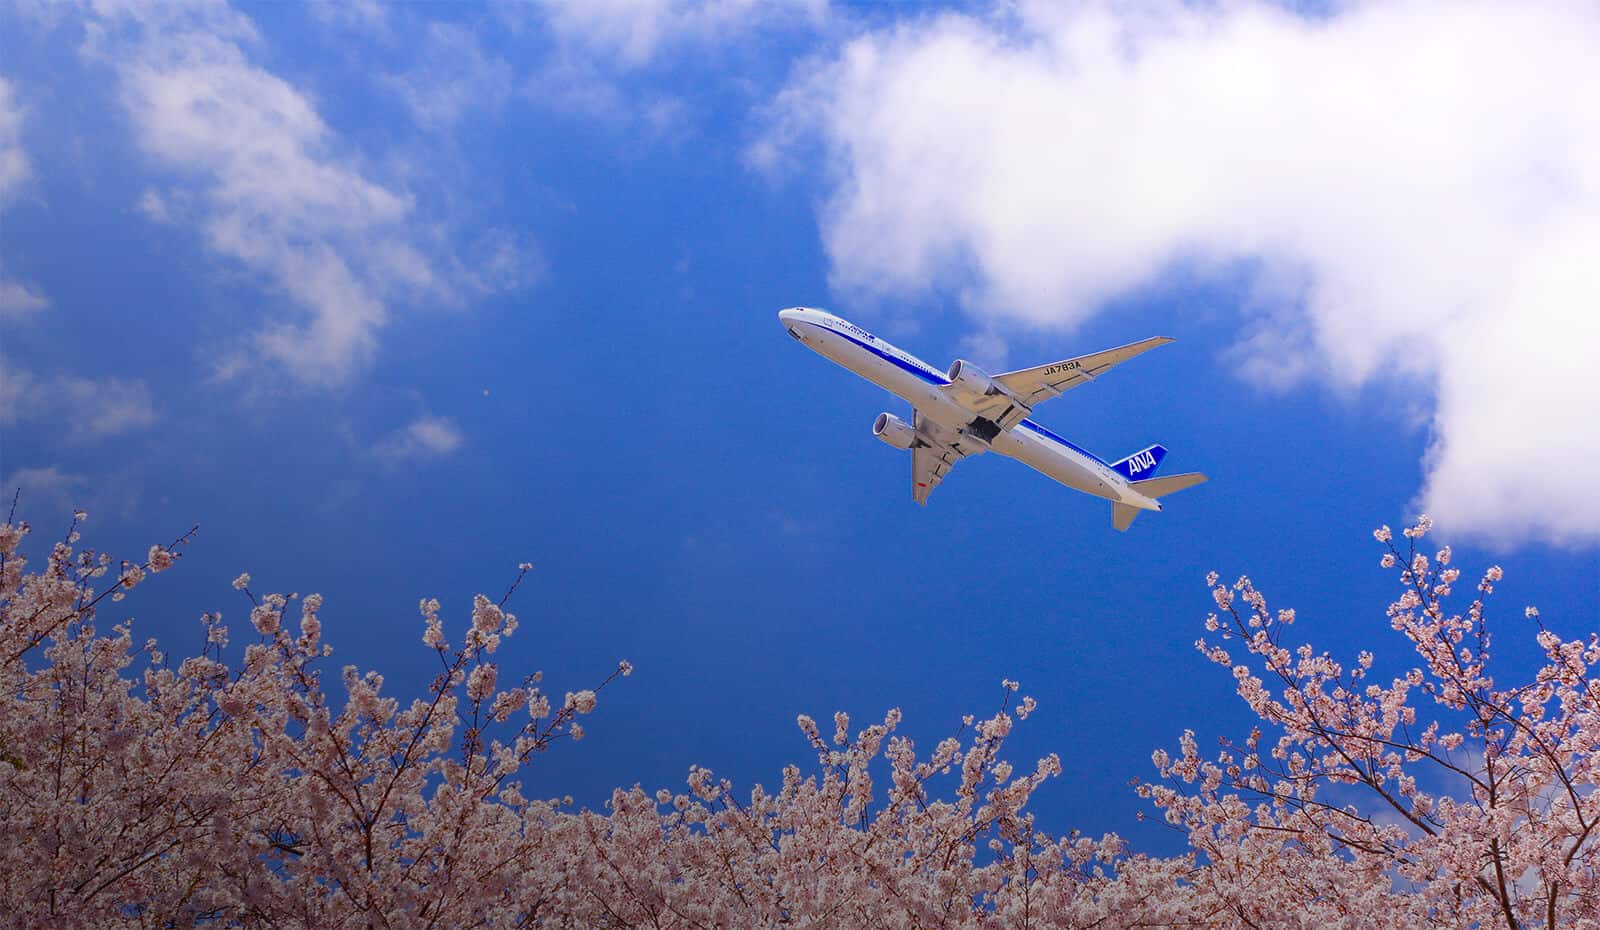 An ANA airplane flying over blooming cherry blossoms against a bright blue sky scattered with clouds.